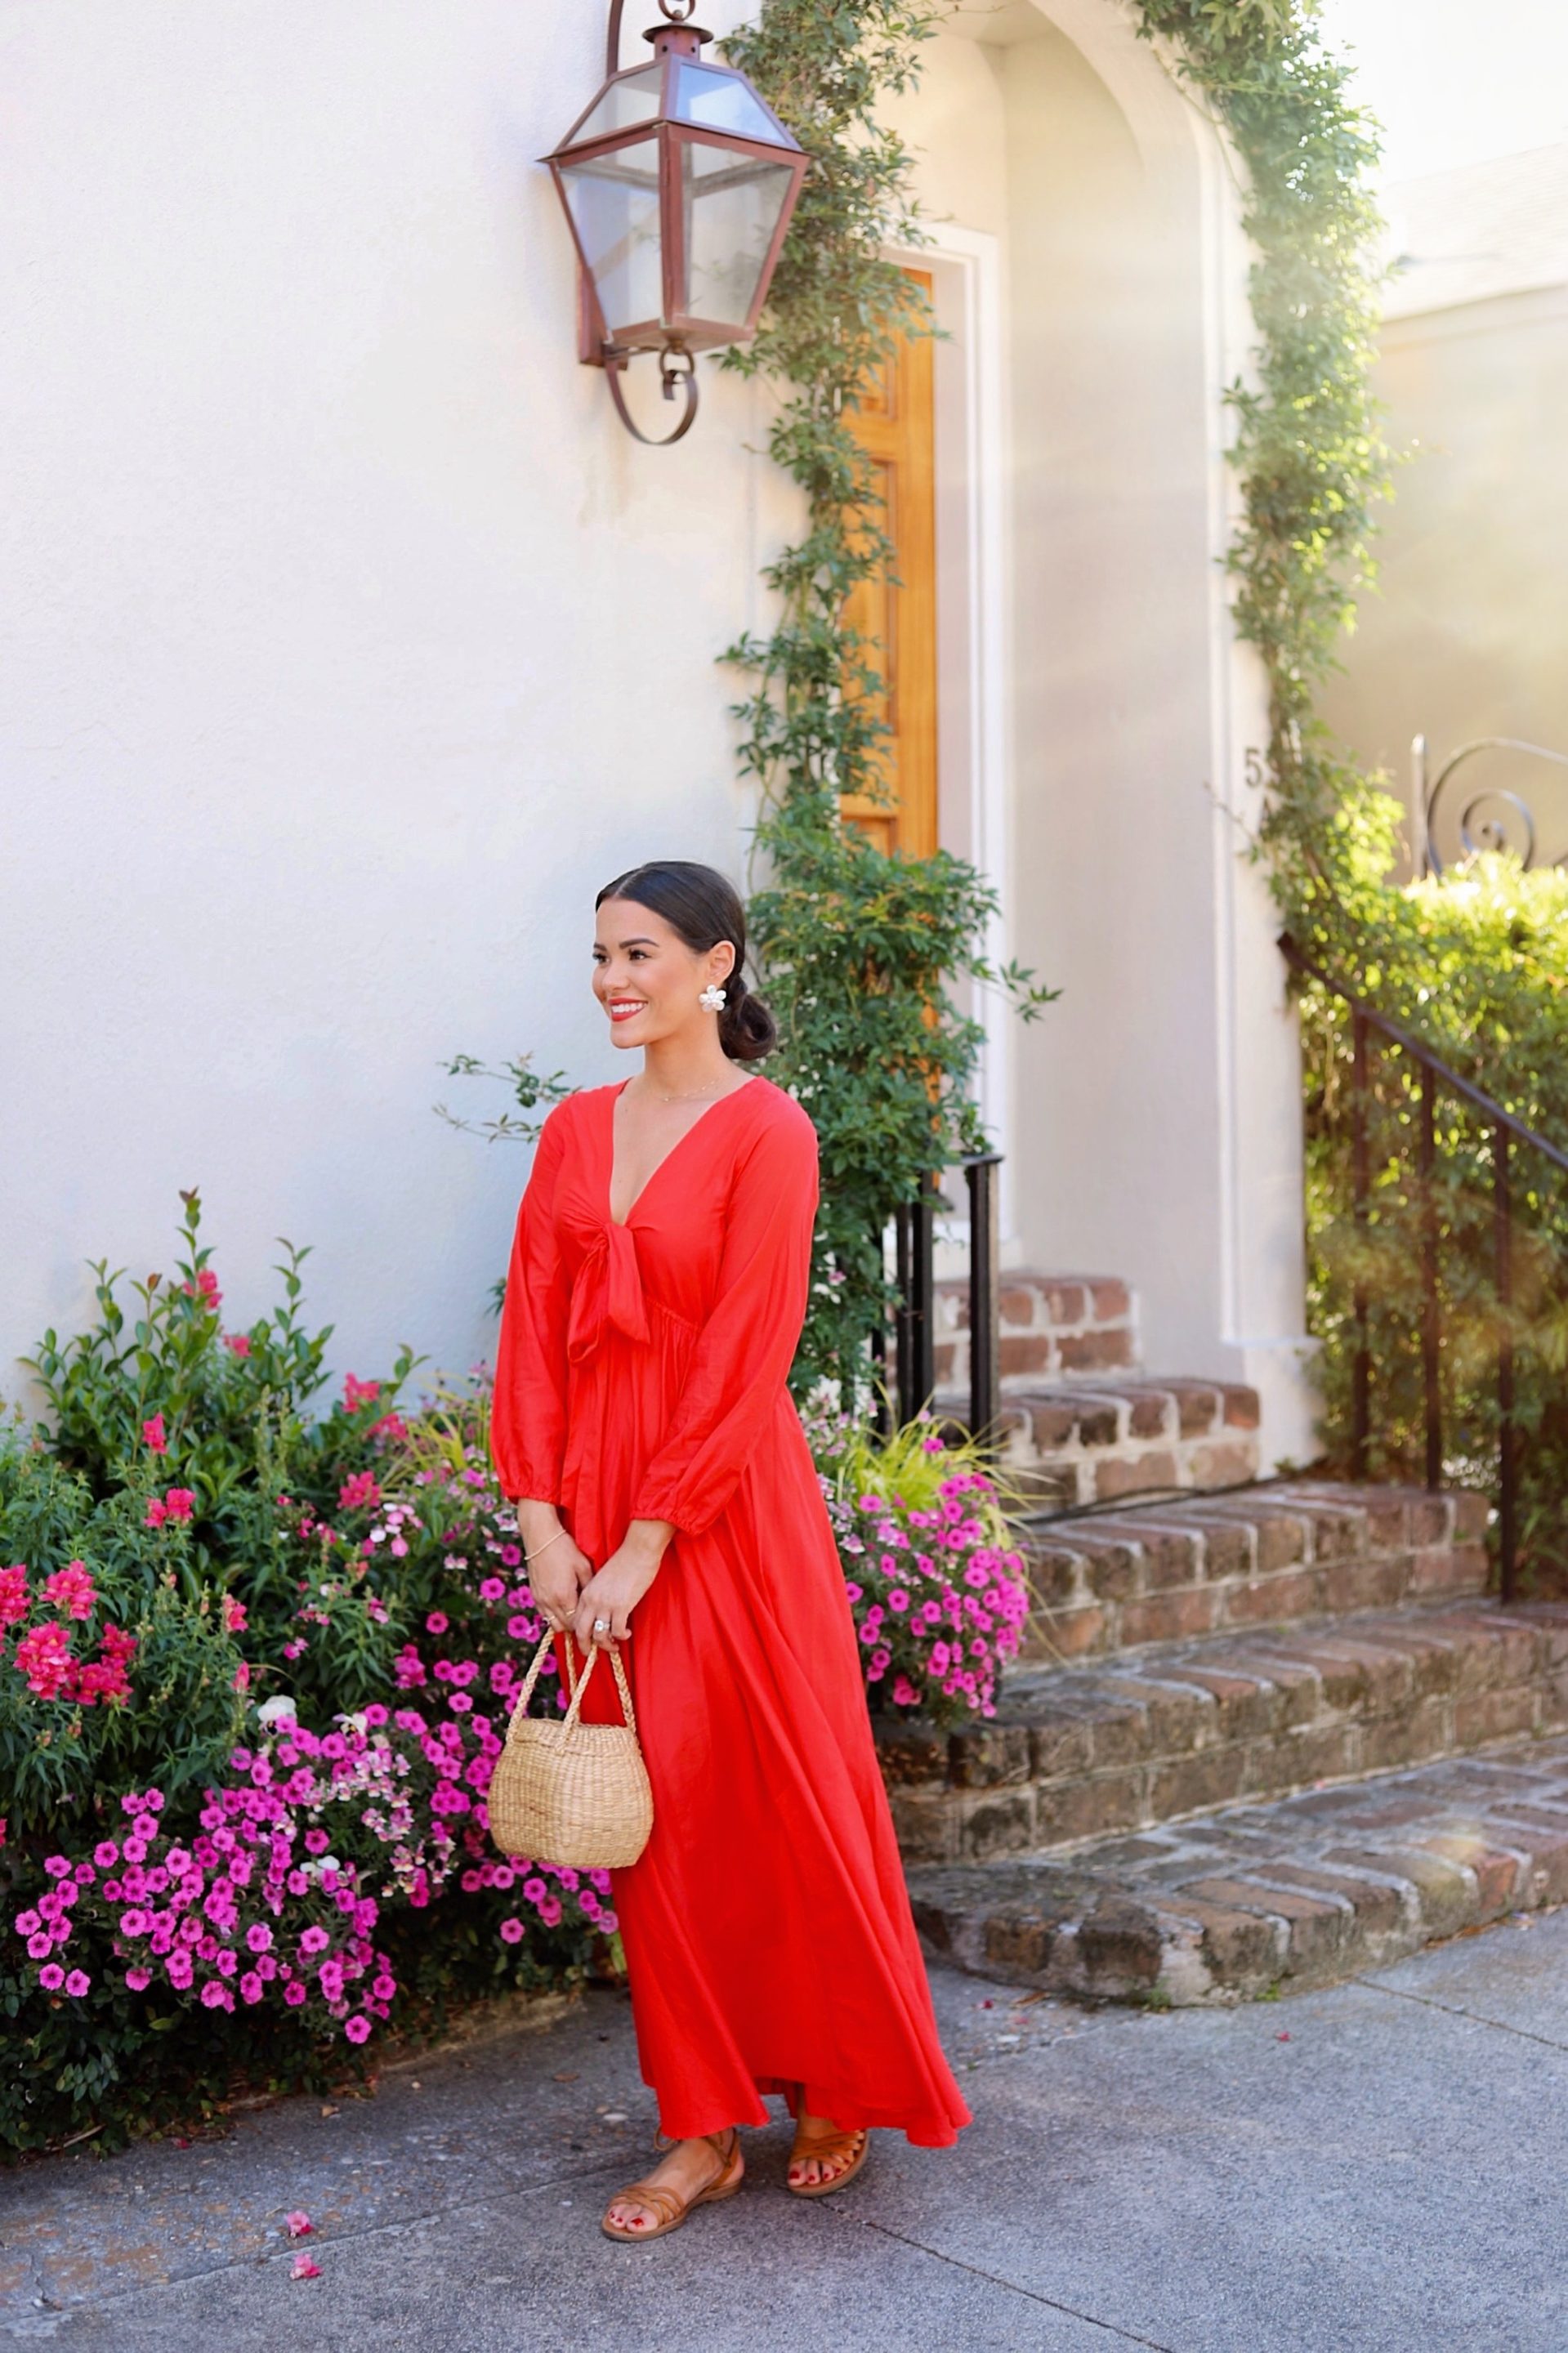 Spring + Summer Wedding Guest Dresses for 2021 - Musings by